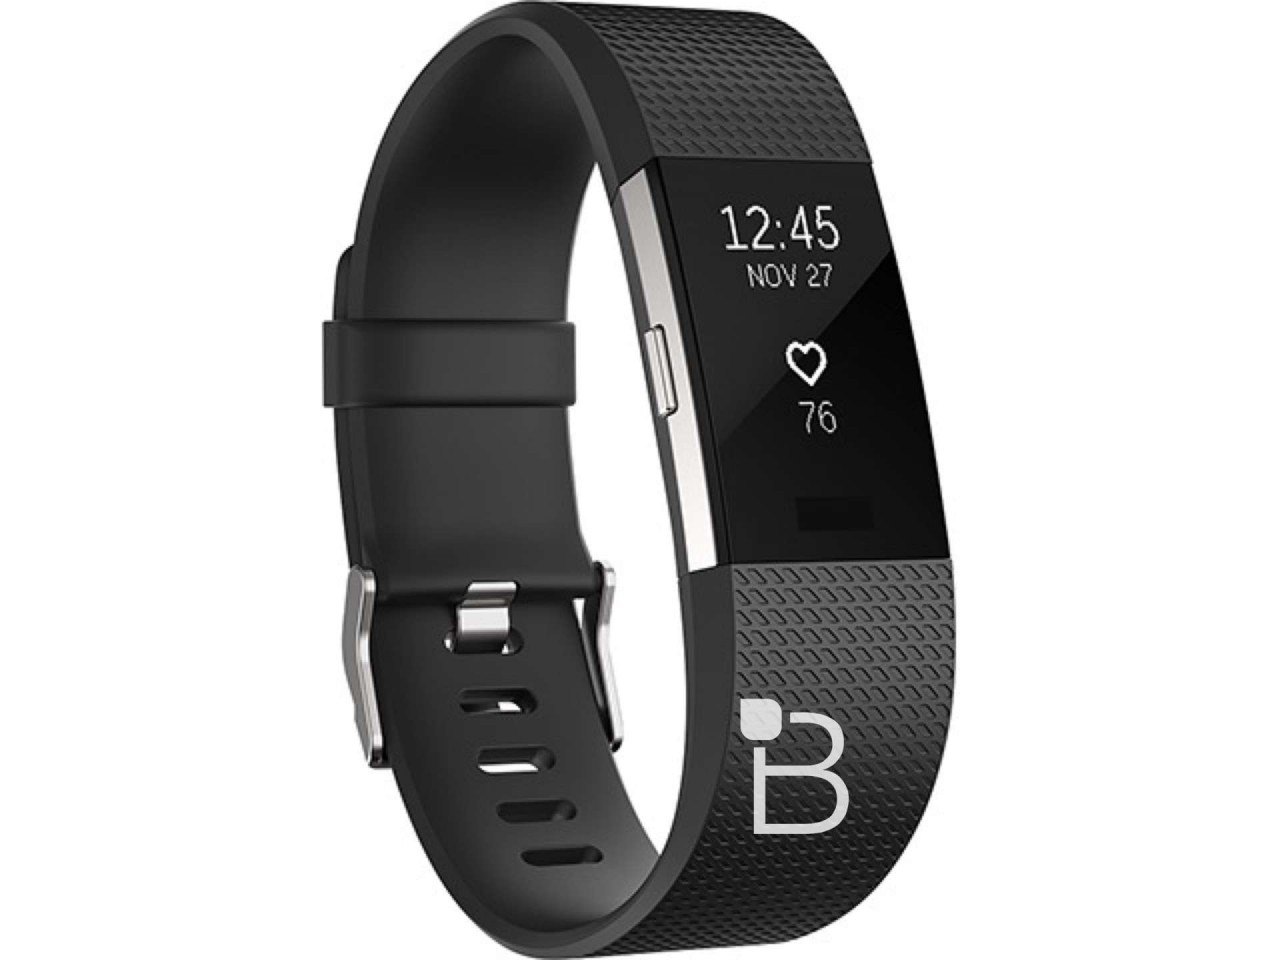 fitbit-charge-2-wm-11-1280x960